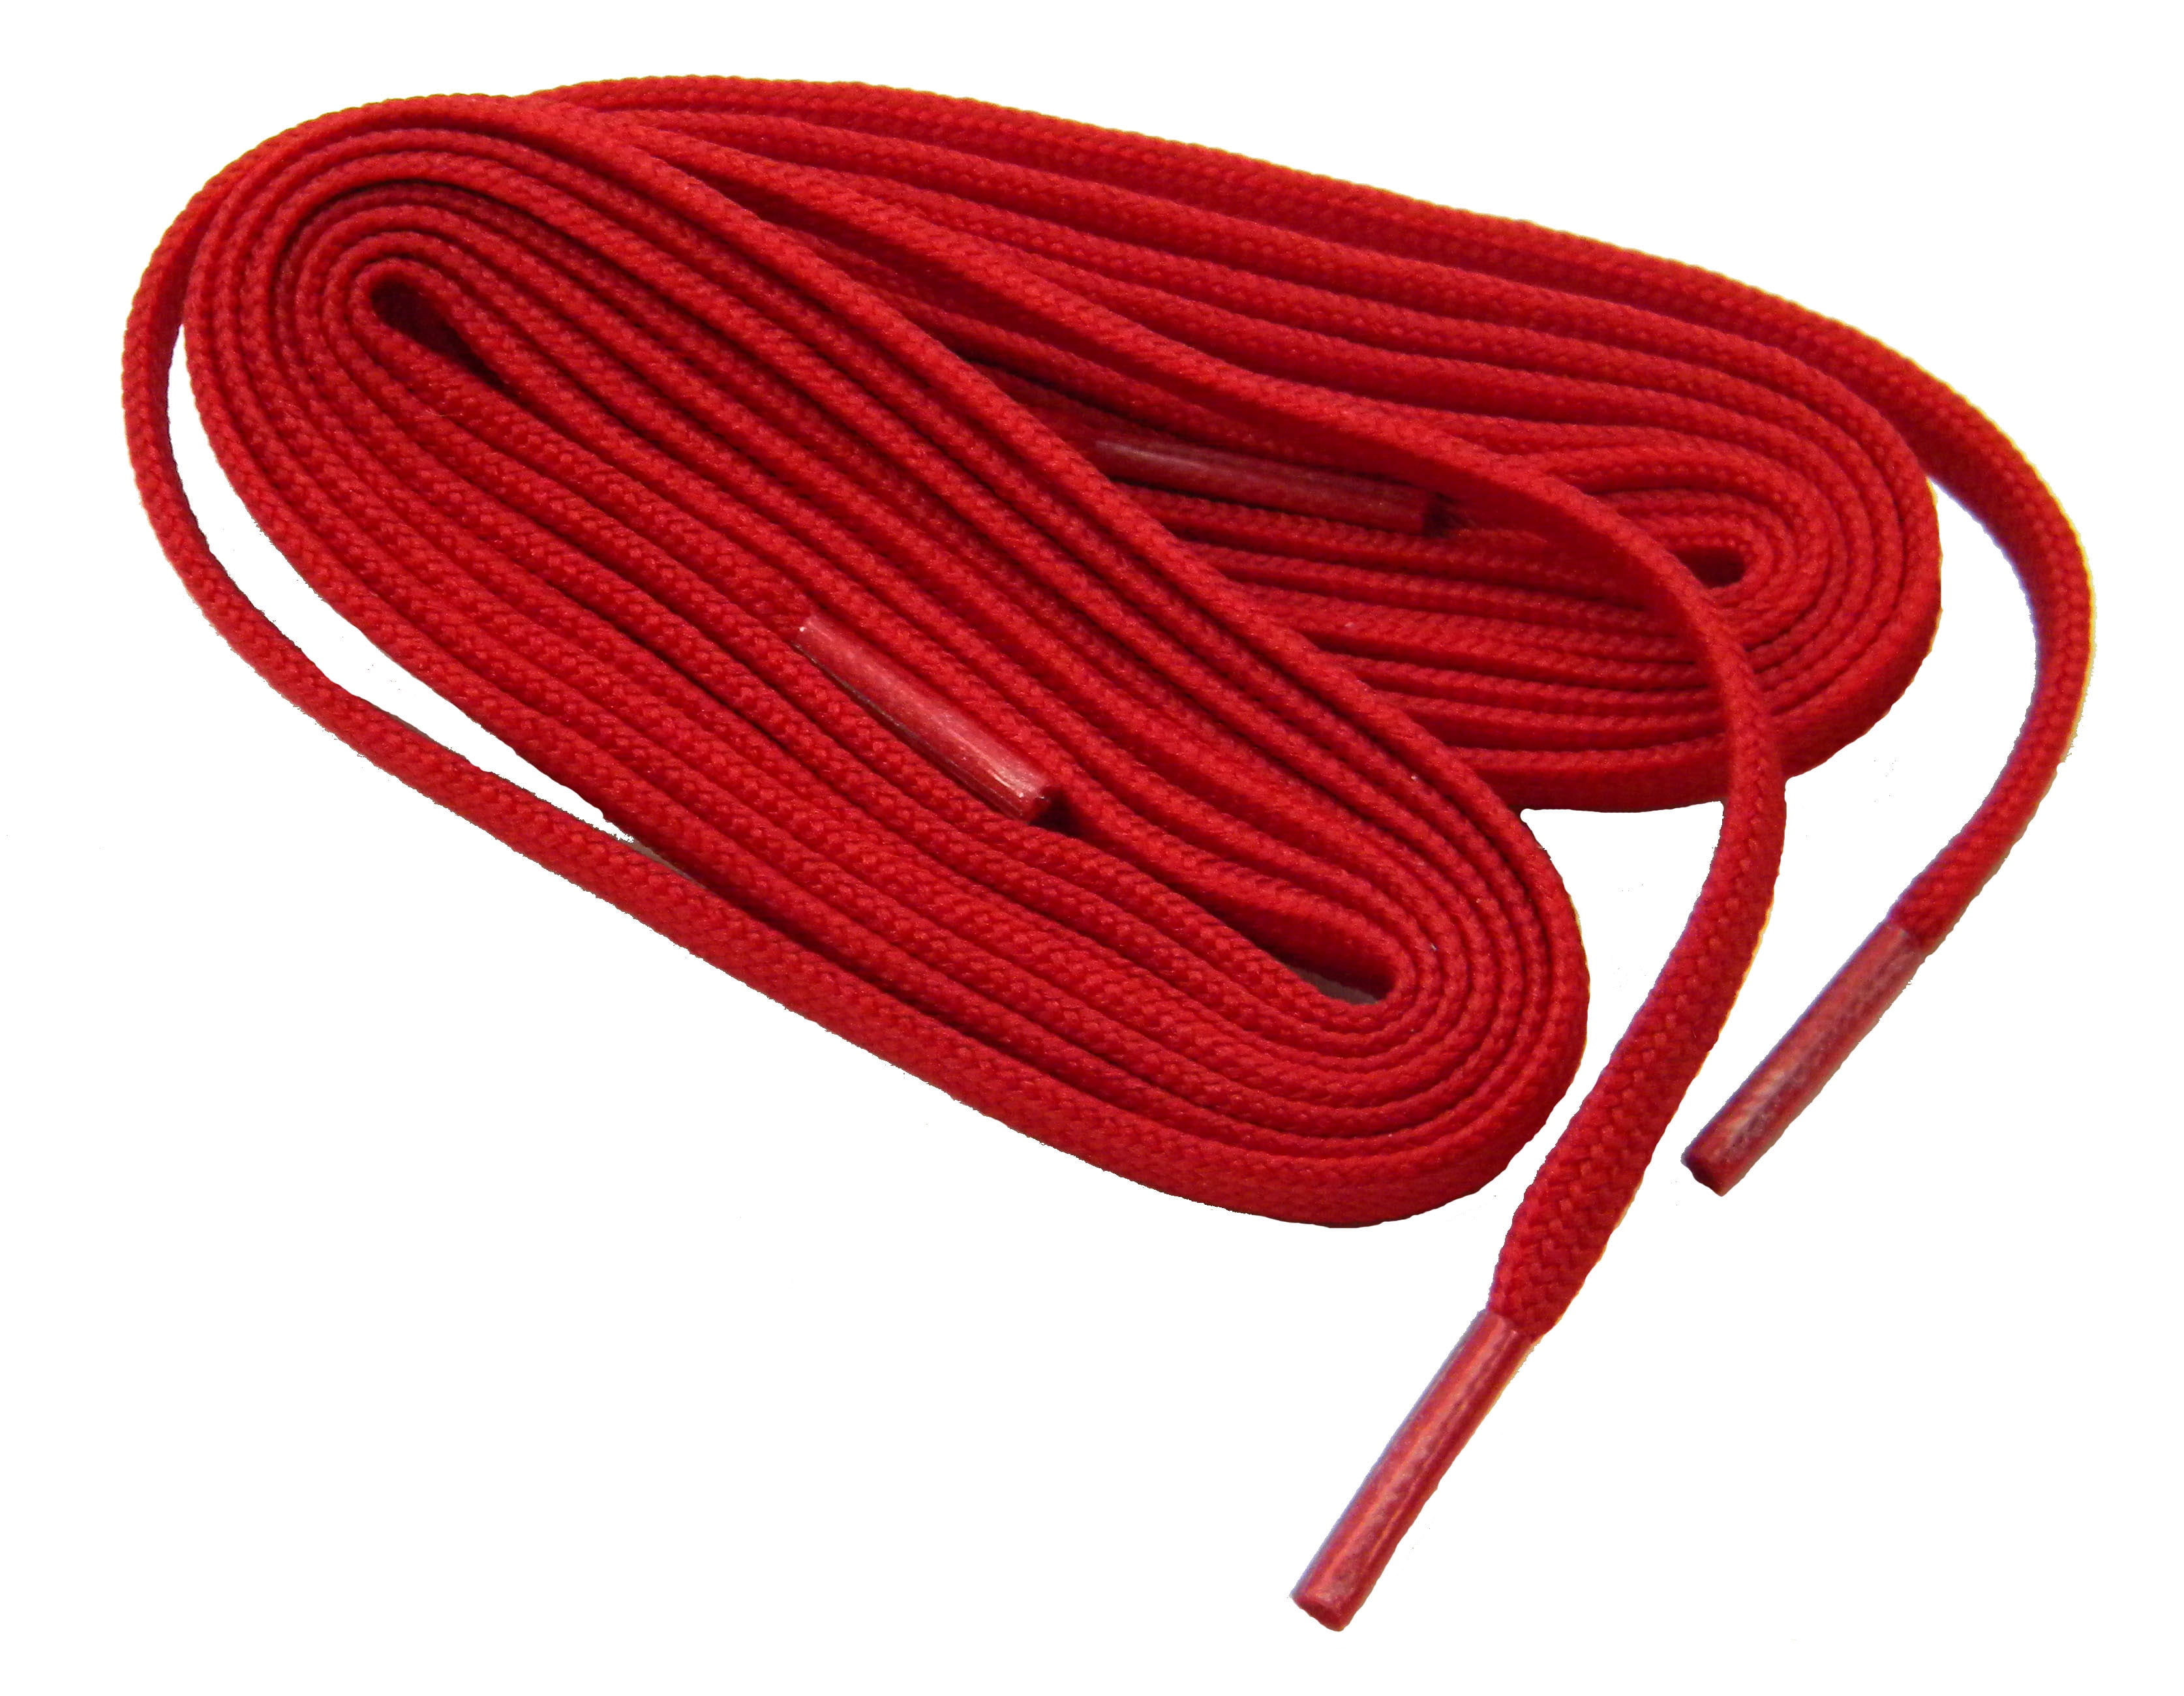 1 Pair Athletic Red Flat Shoe Laces ~48” 